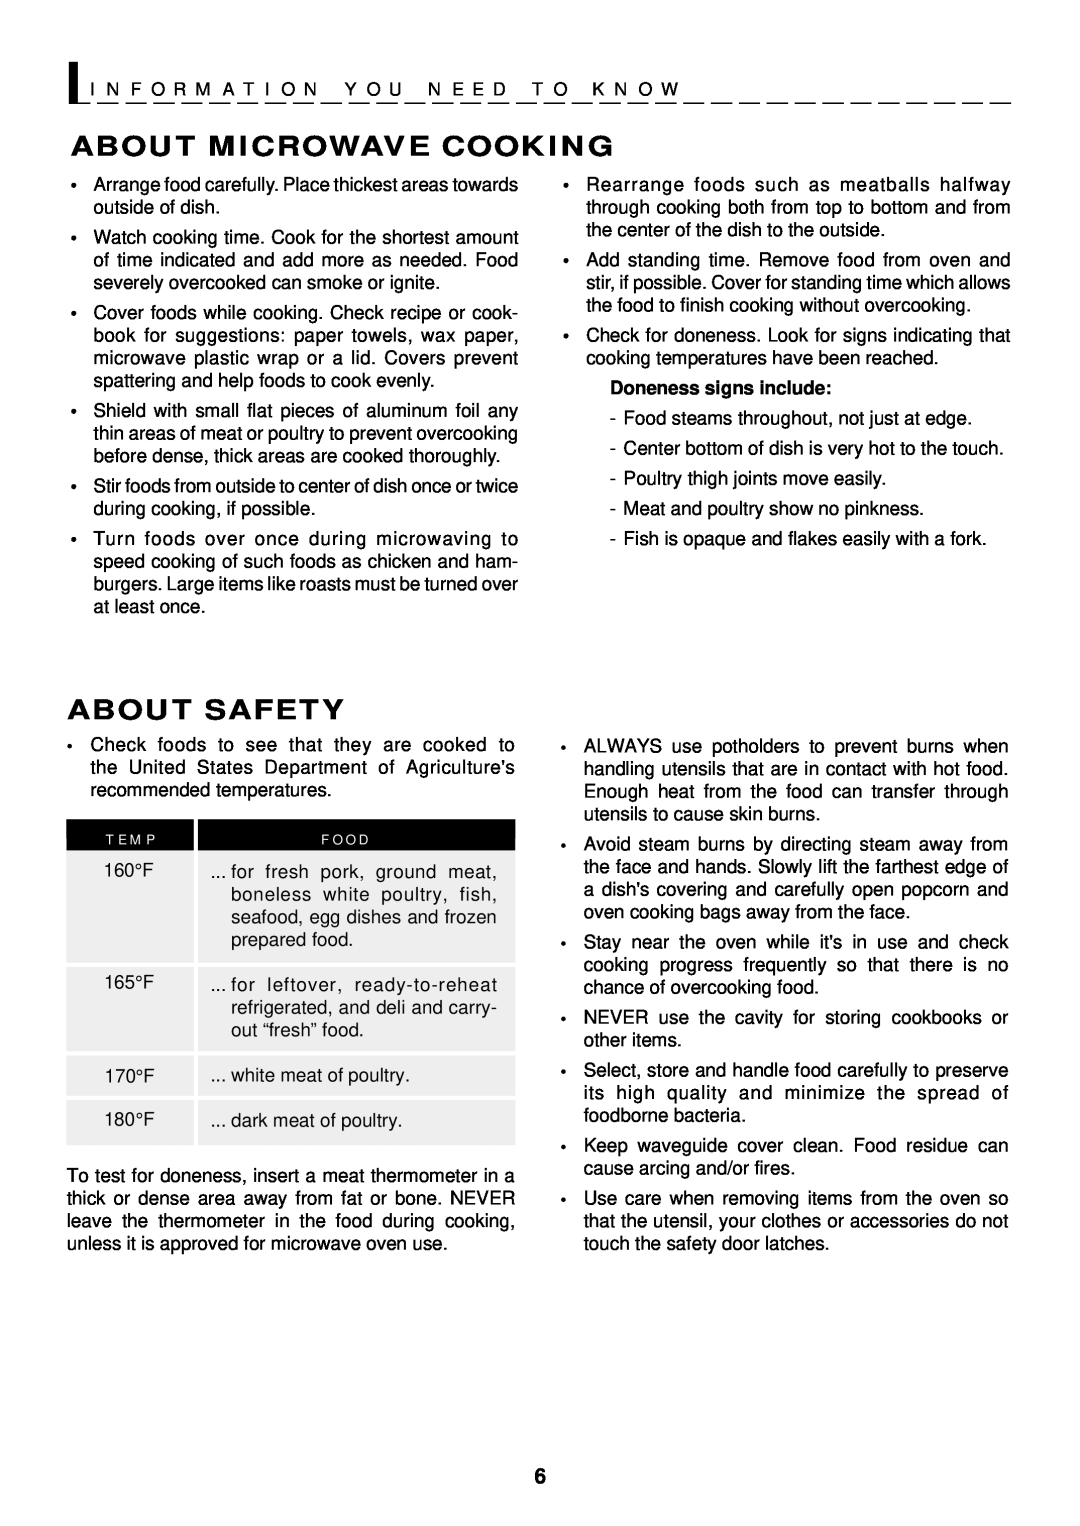 Sharp R-420D About Microwave Cooking, About Safety, T E M P, F O O D, I N F O R M A T I O N Y O U N E E D T O K N O W 